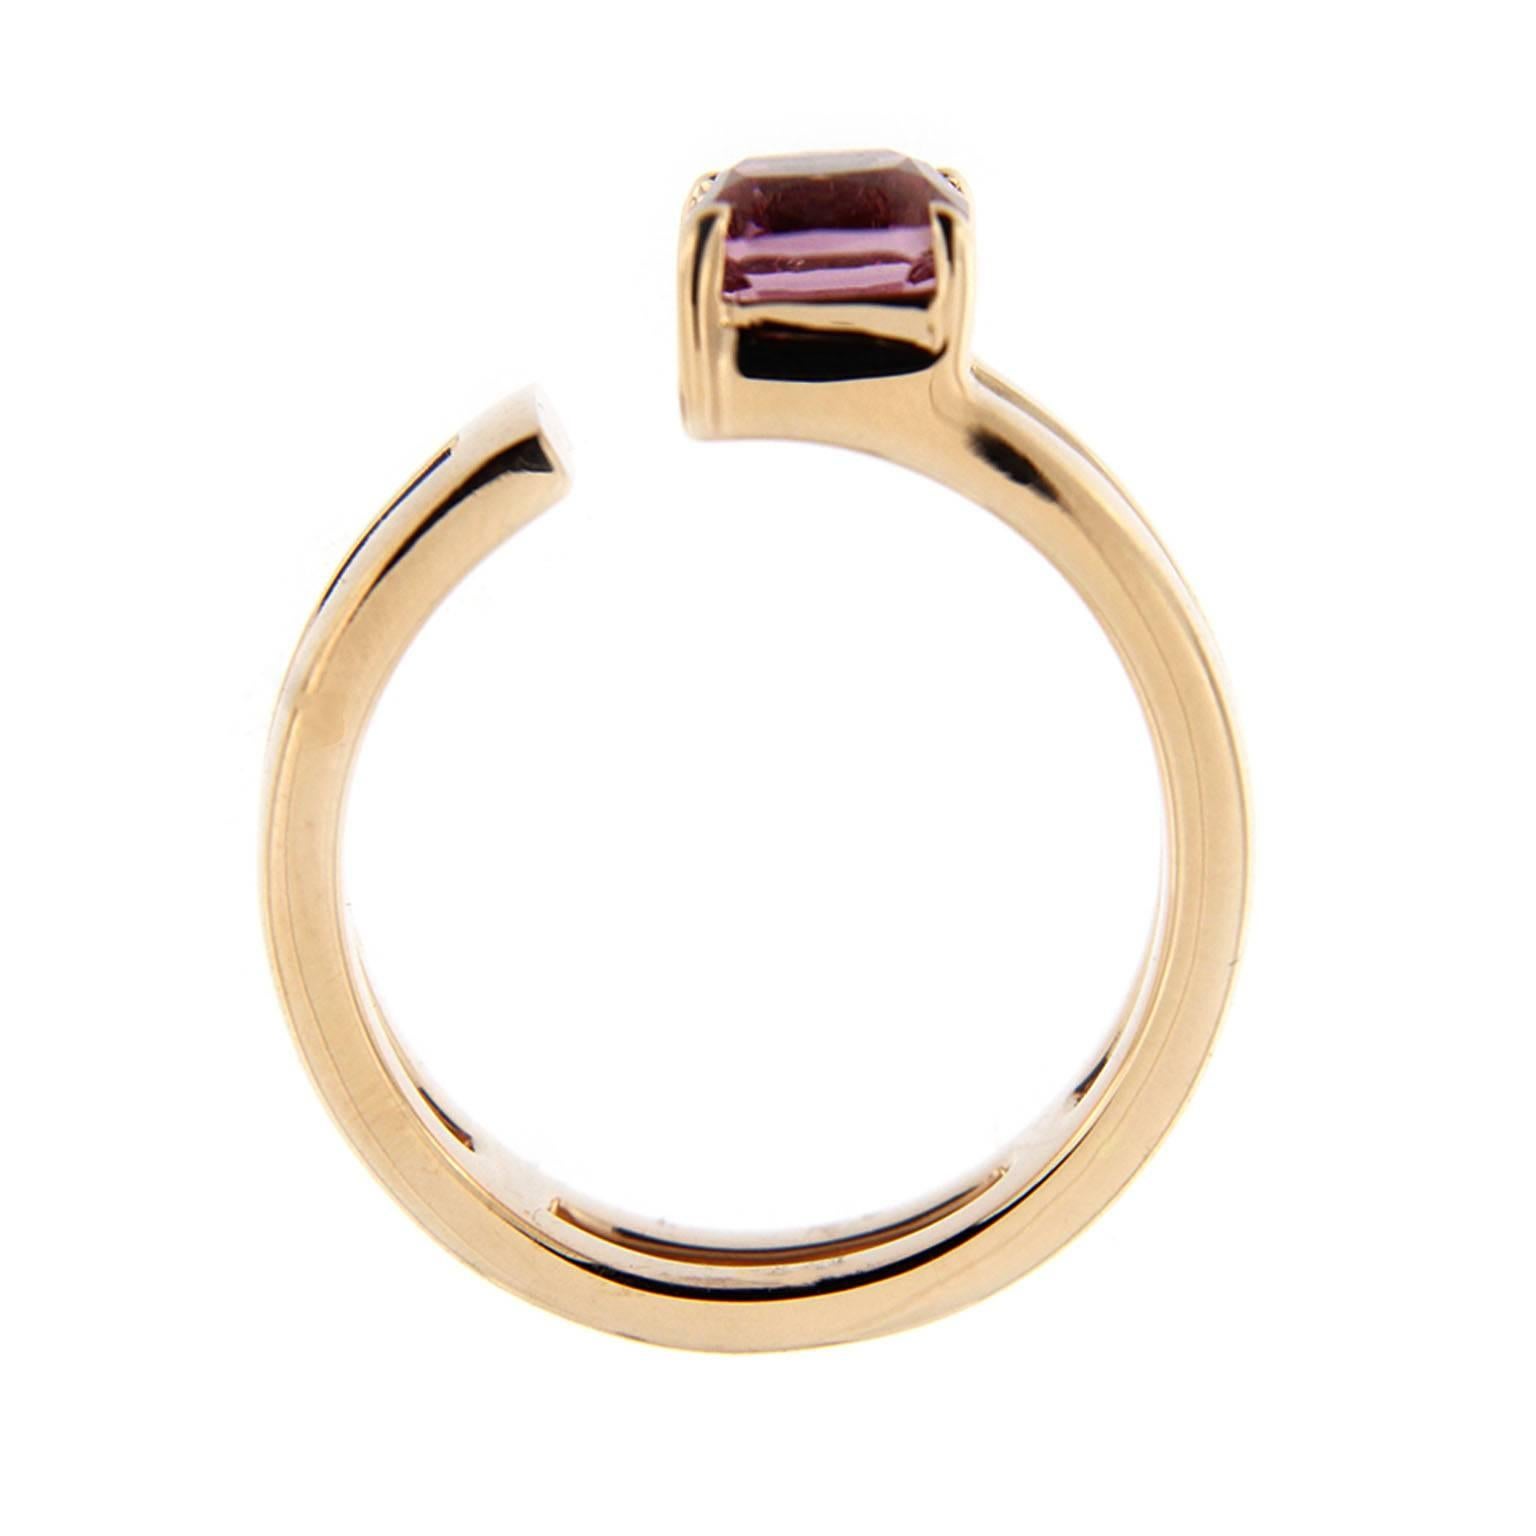 Jona design collection, hand crafted in Italy, 18 Karat yellow gold open band ring set with a Pink Spinel weighing 1.48 carats. US size 6 can be sized to any specification.

Dimensions:
0.96 in. H x 0.81 in. W x 0.25 in. D
2.4 cm. H x 2 cm. W x 0.64